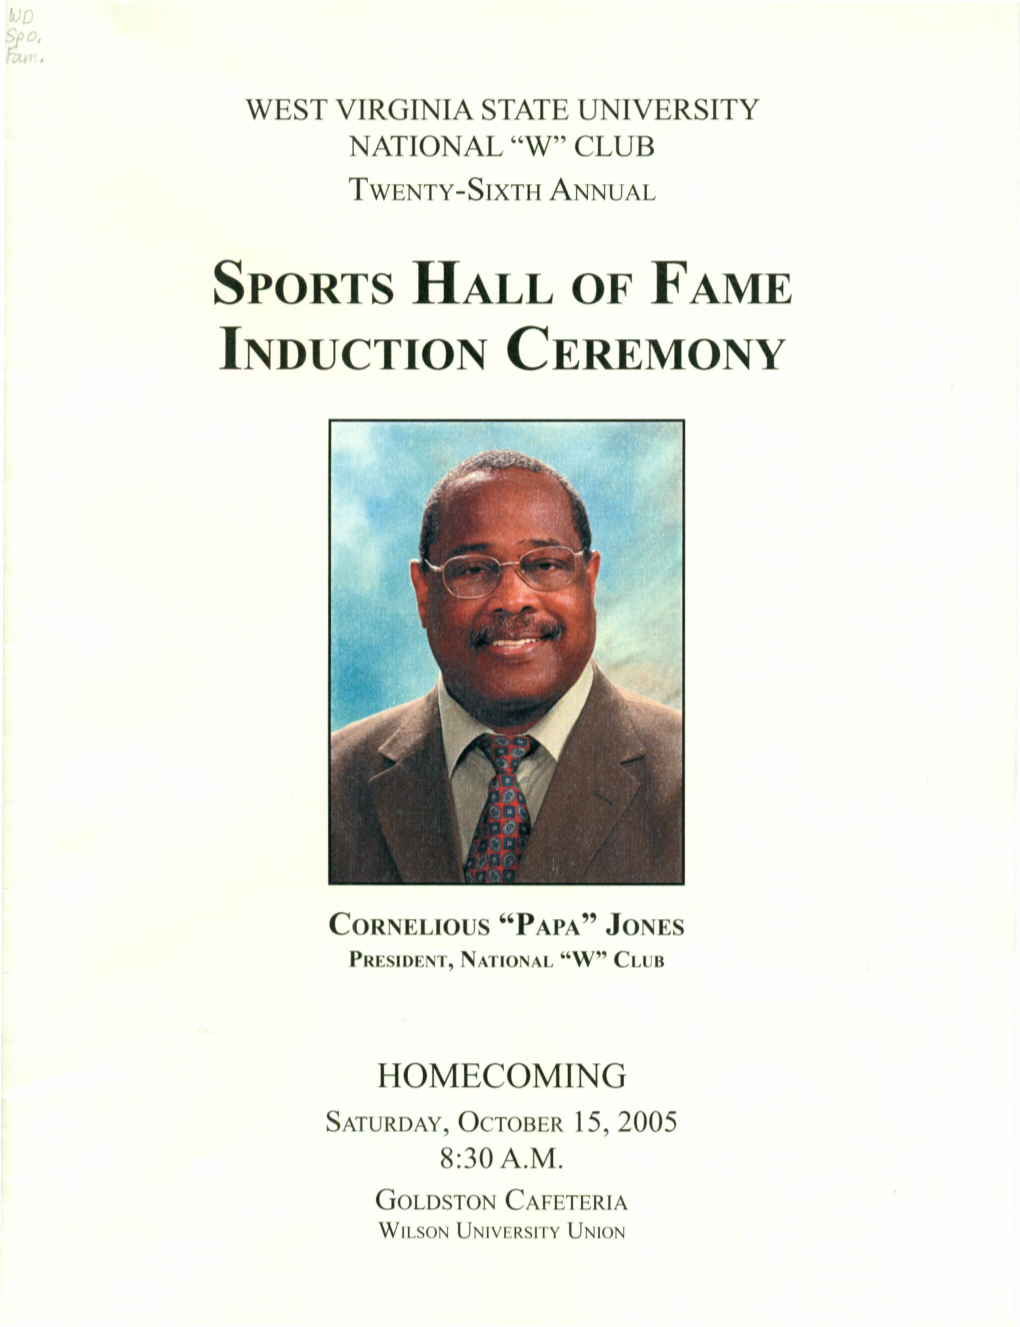 WEST VIRGINIA STATE UNIVERSITY SPORTS HALL of FAME in Loving